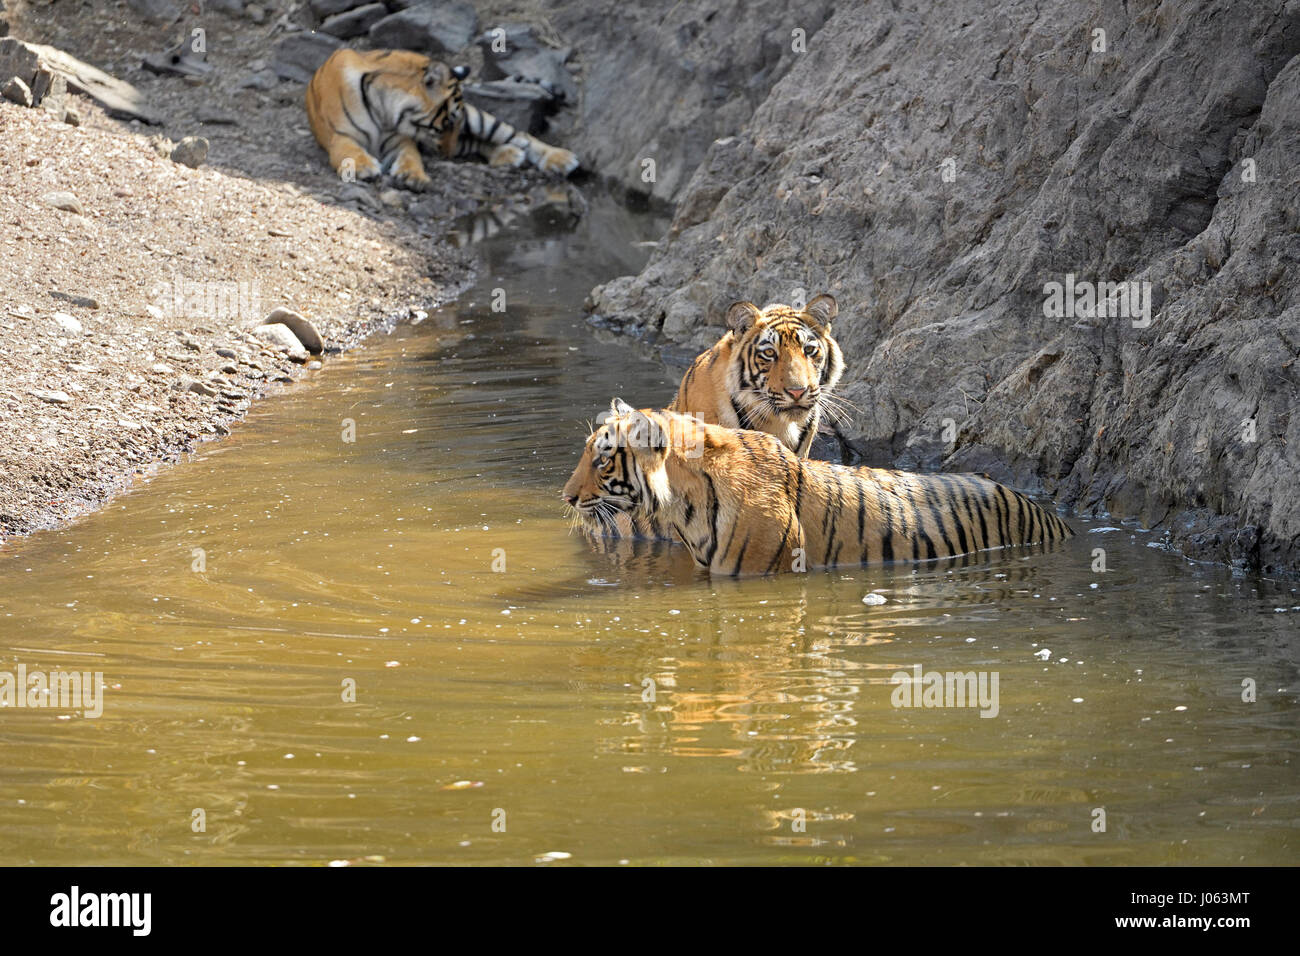 Two sub adult tiger cubs, playing in a water hole during the hot and dry summers in Ranthambhore tiger reserve, India Stock Photo